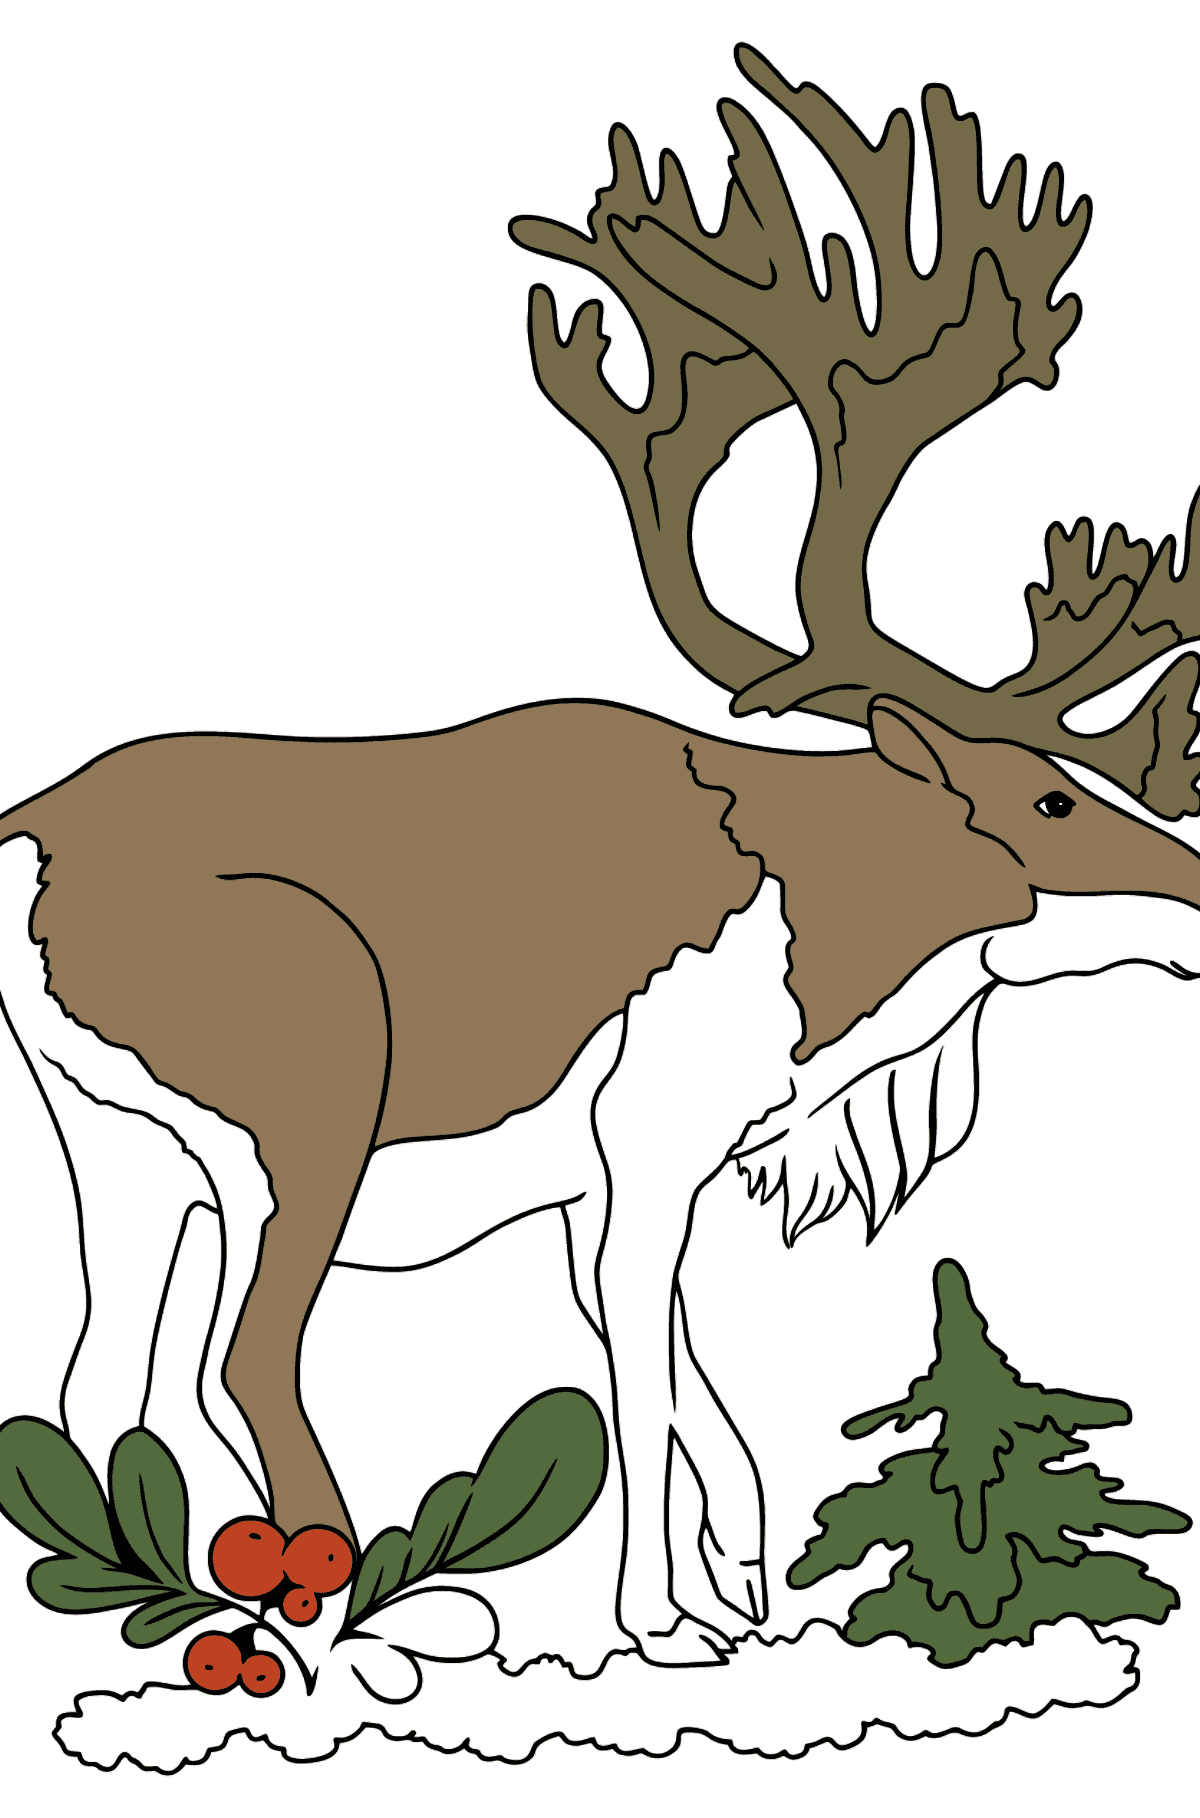 Coloring Page - A Deer with Beautiful Antlers - Coloring Pages for Kids